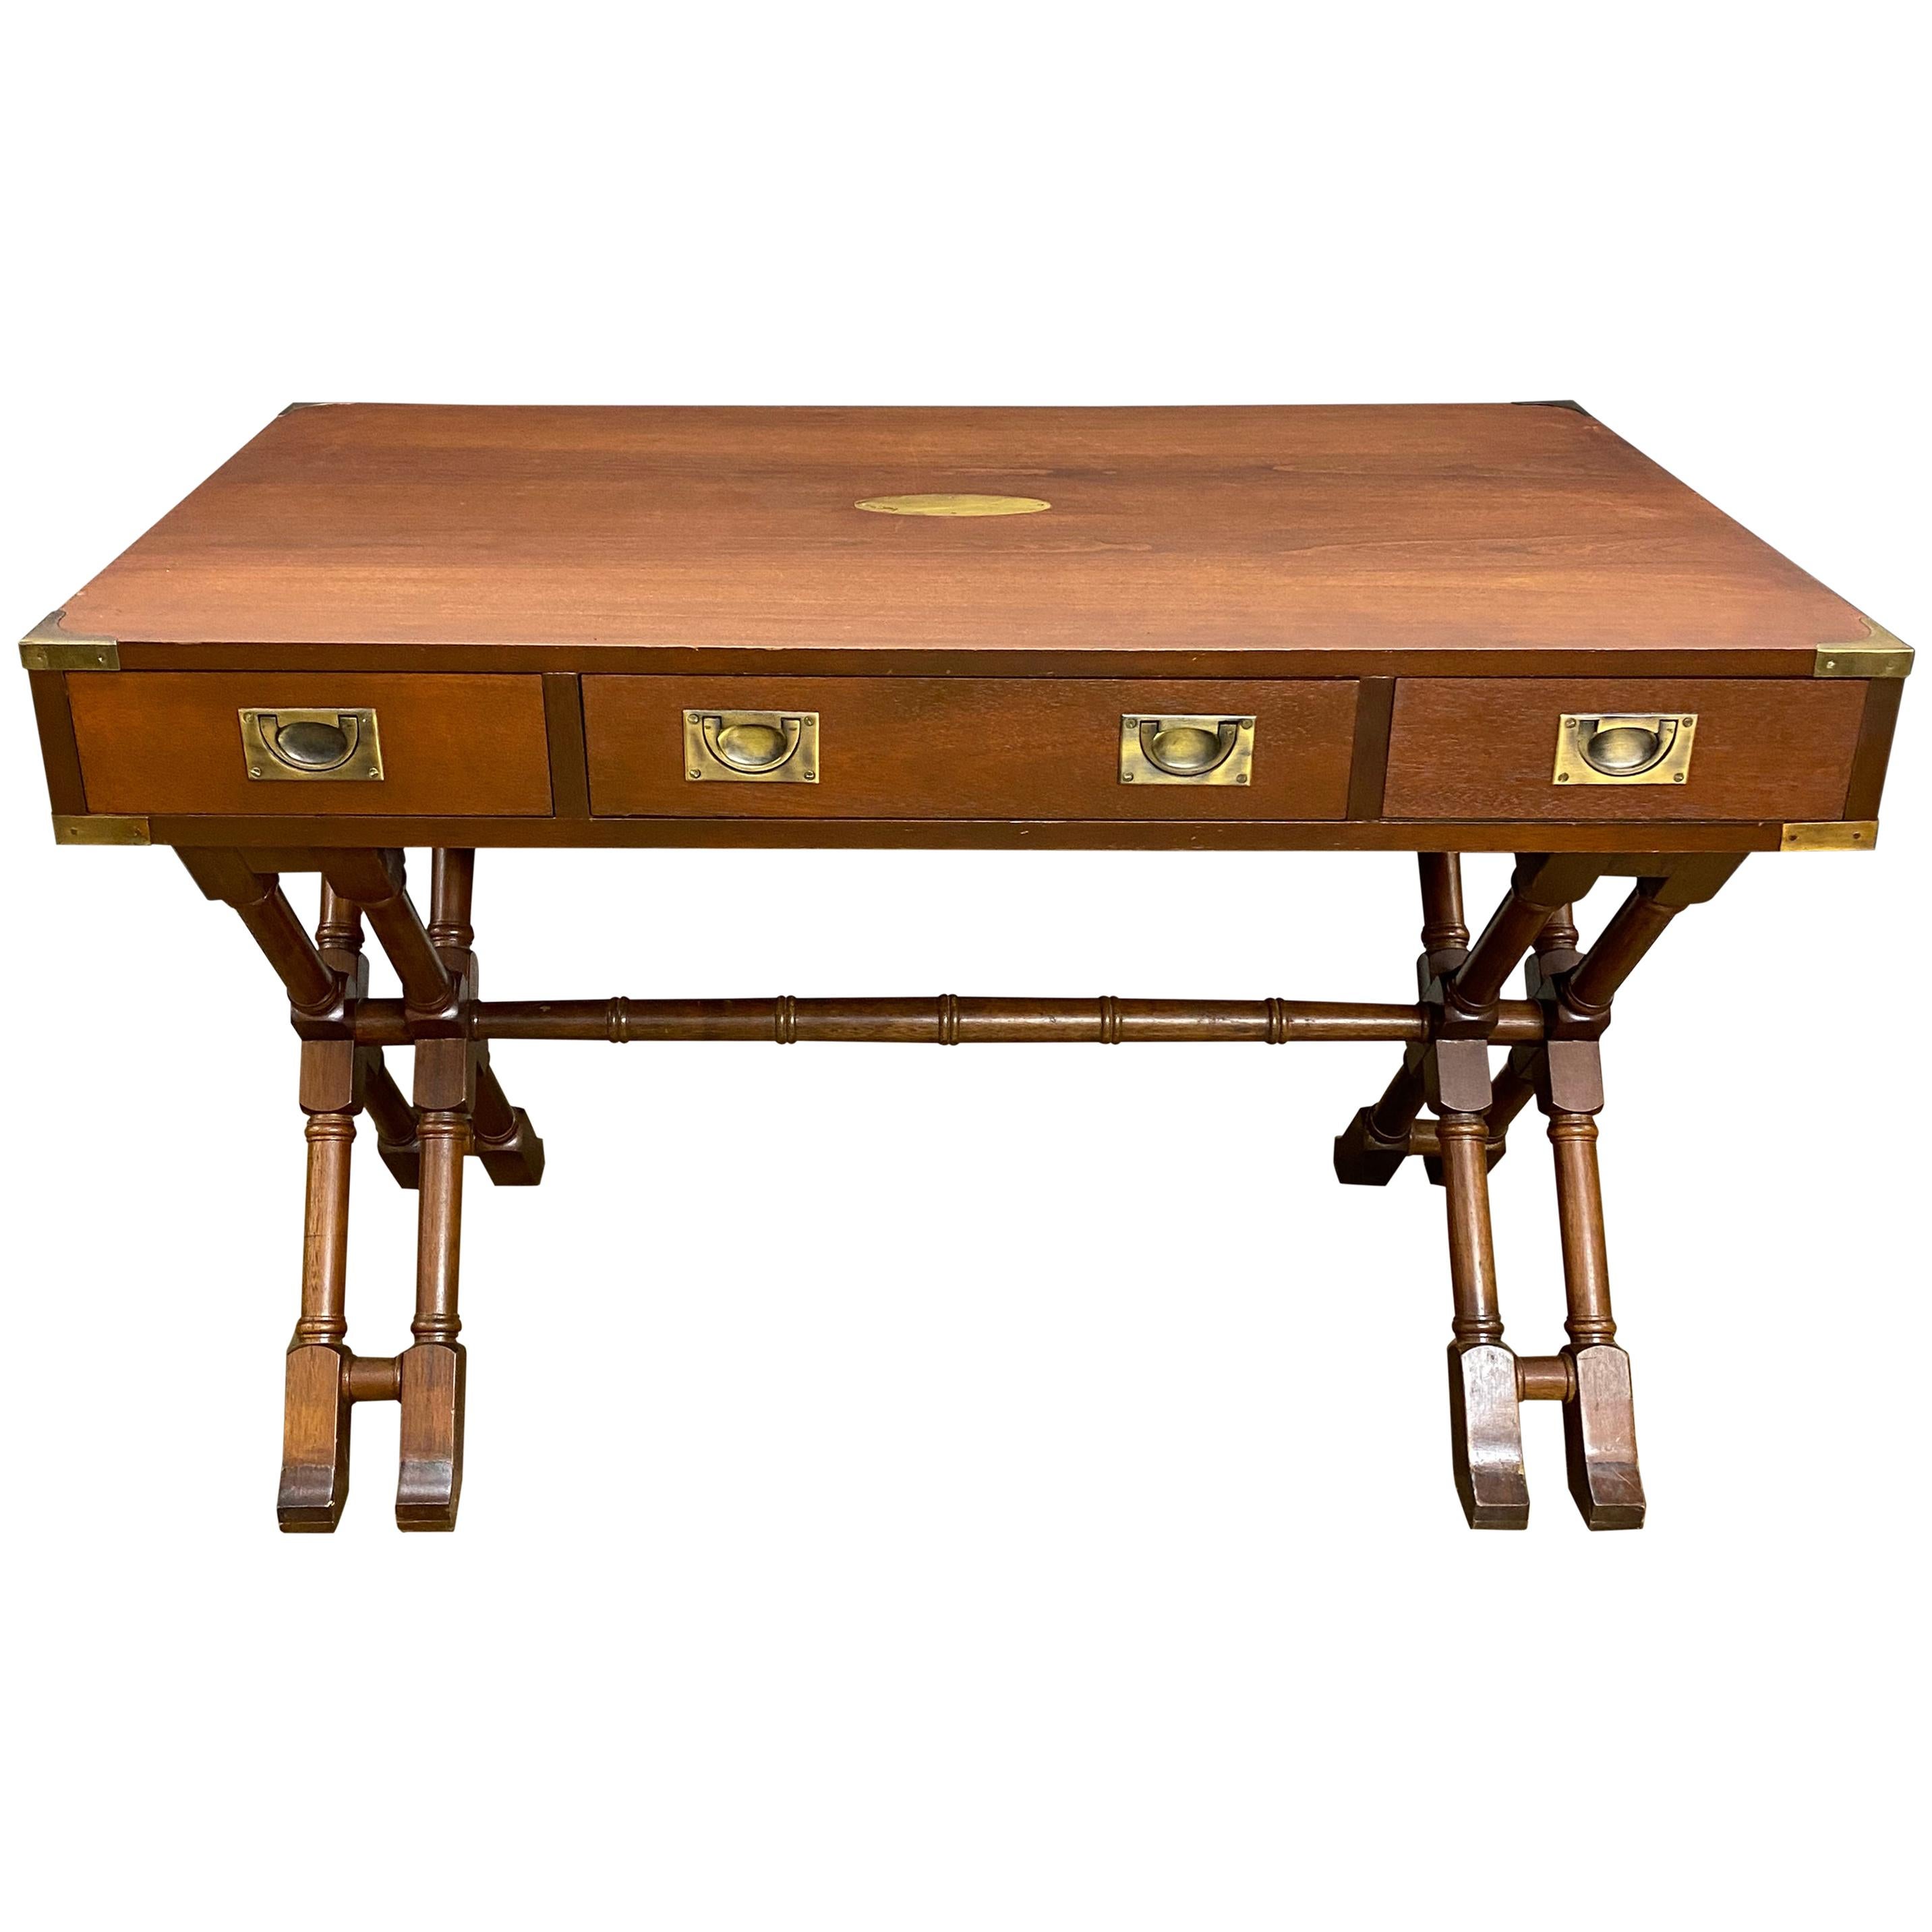 Vintage Baker Mahogany Campaign Desk with X-Base and Brass Hardware